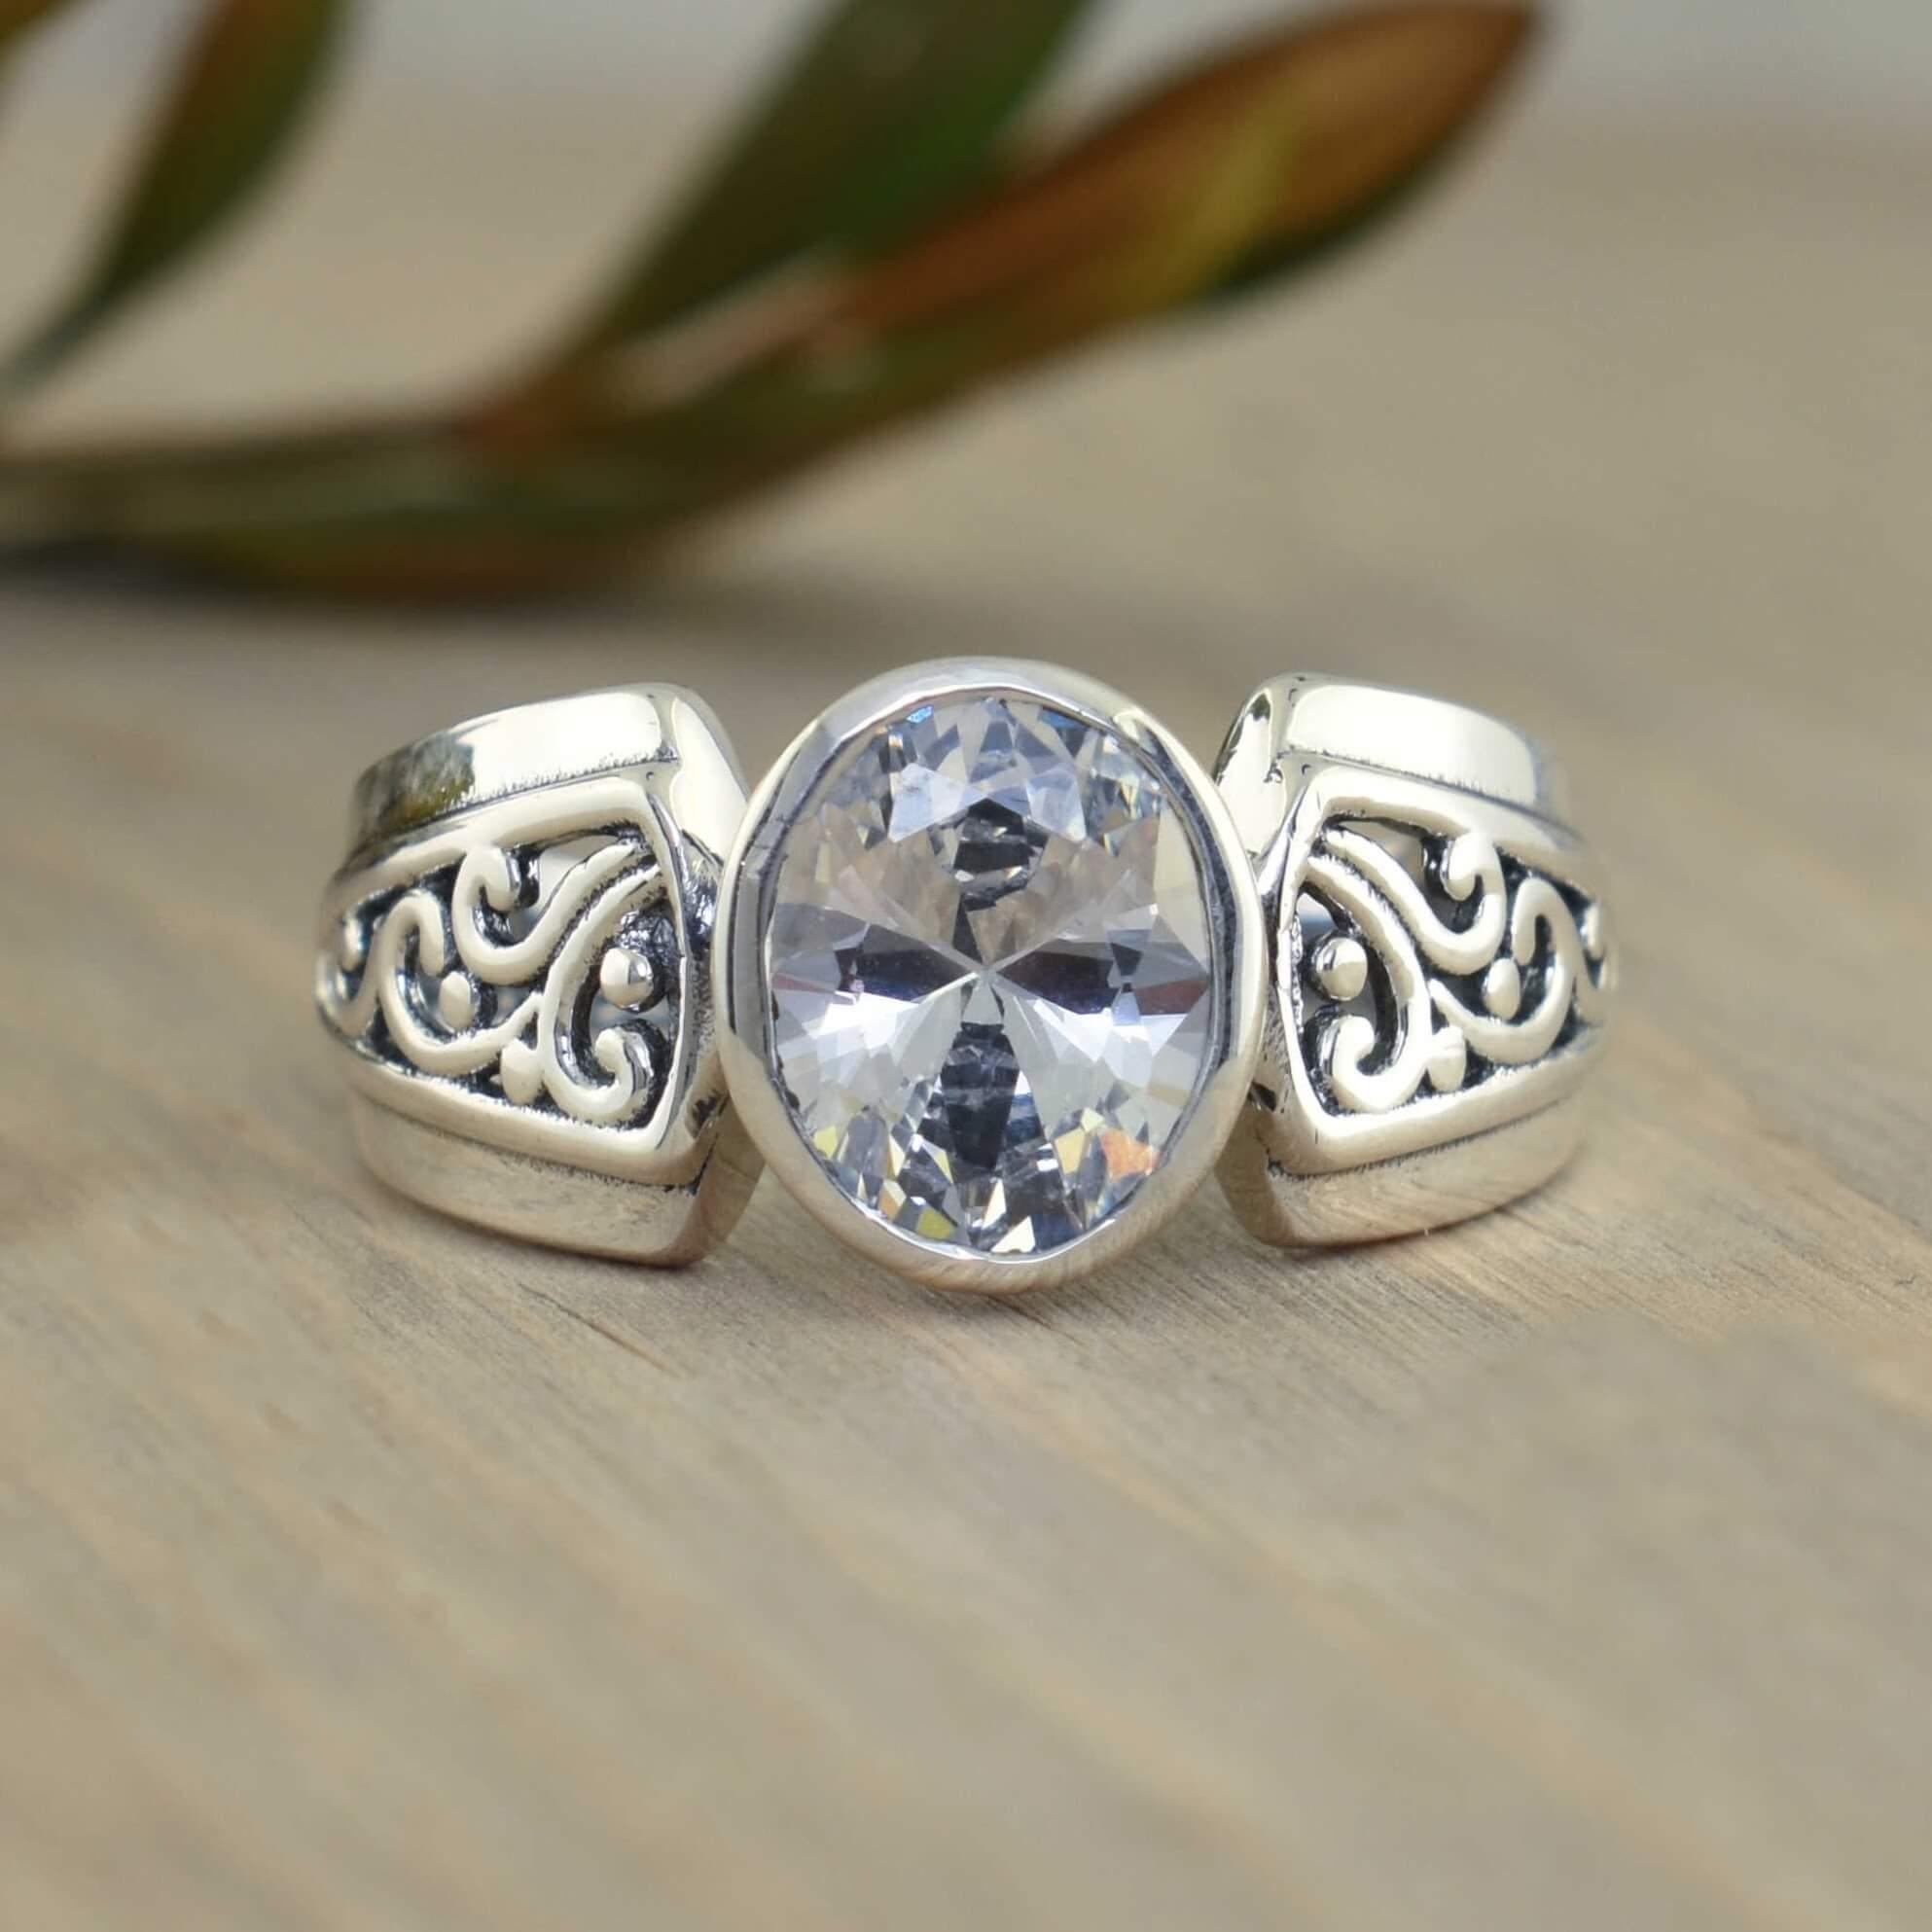 Filigree sterling silver ring with oval cz